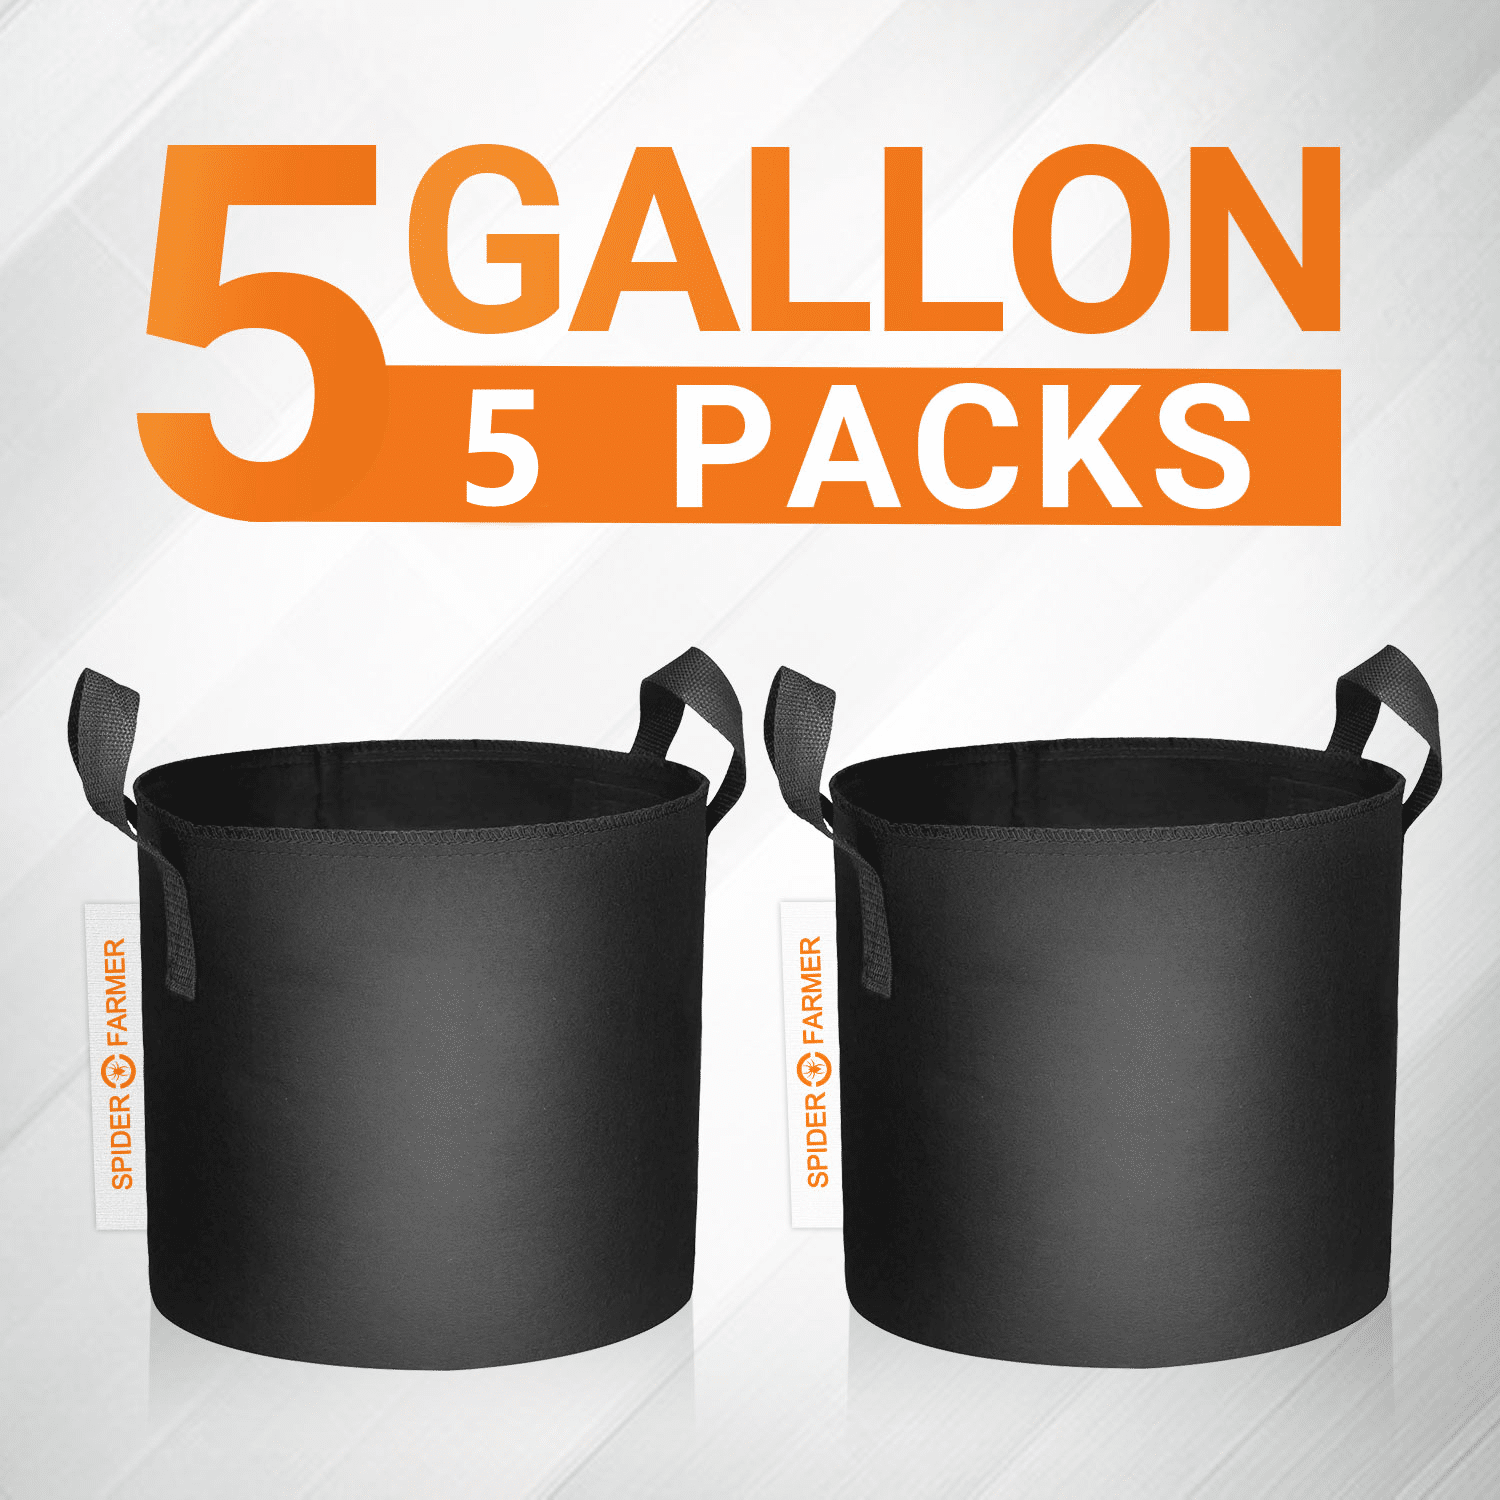 Black 300G Premium Series Thickened Non-Woven Breathable Fabric Pots Kensizer 5-Pack 5 Gallons Plant Grow Bags Reinforced Weight Capacity and Durable 